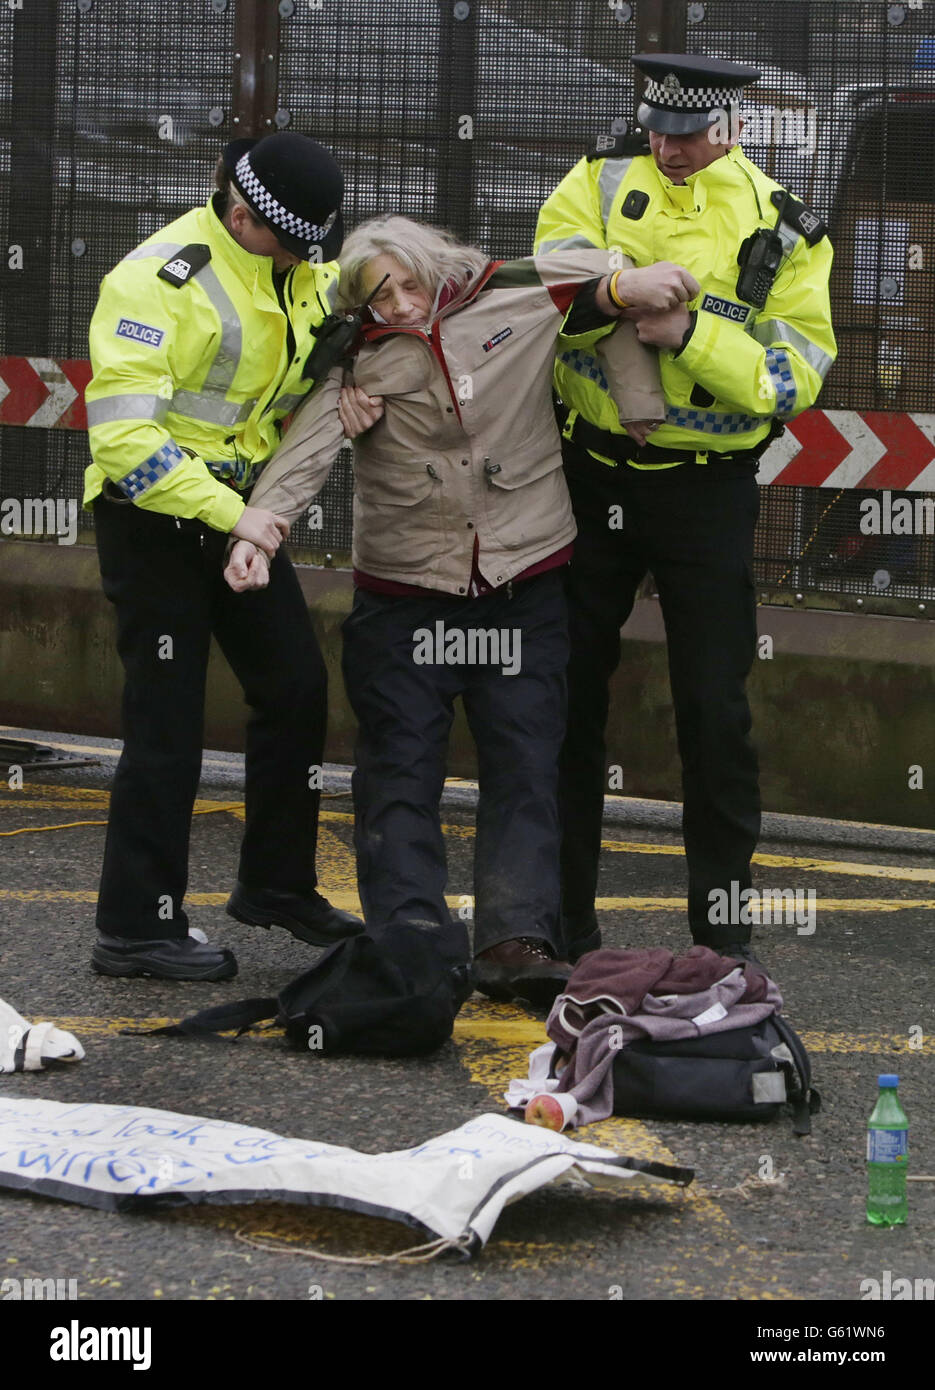 Protesters are moved by police at a blockade oustside Faslane Naval Base in Scotland during an anti Trident demonstration. Stock Photo